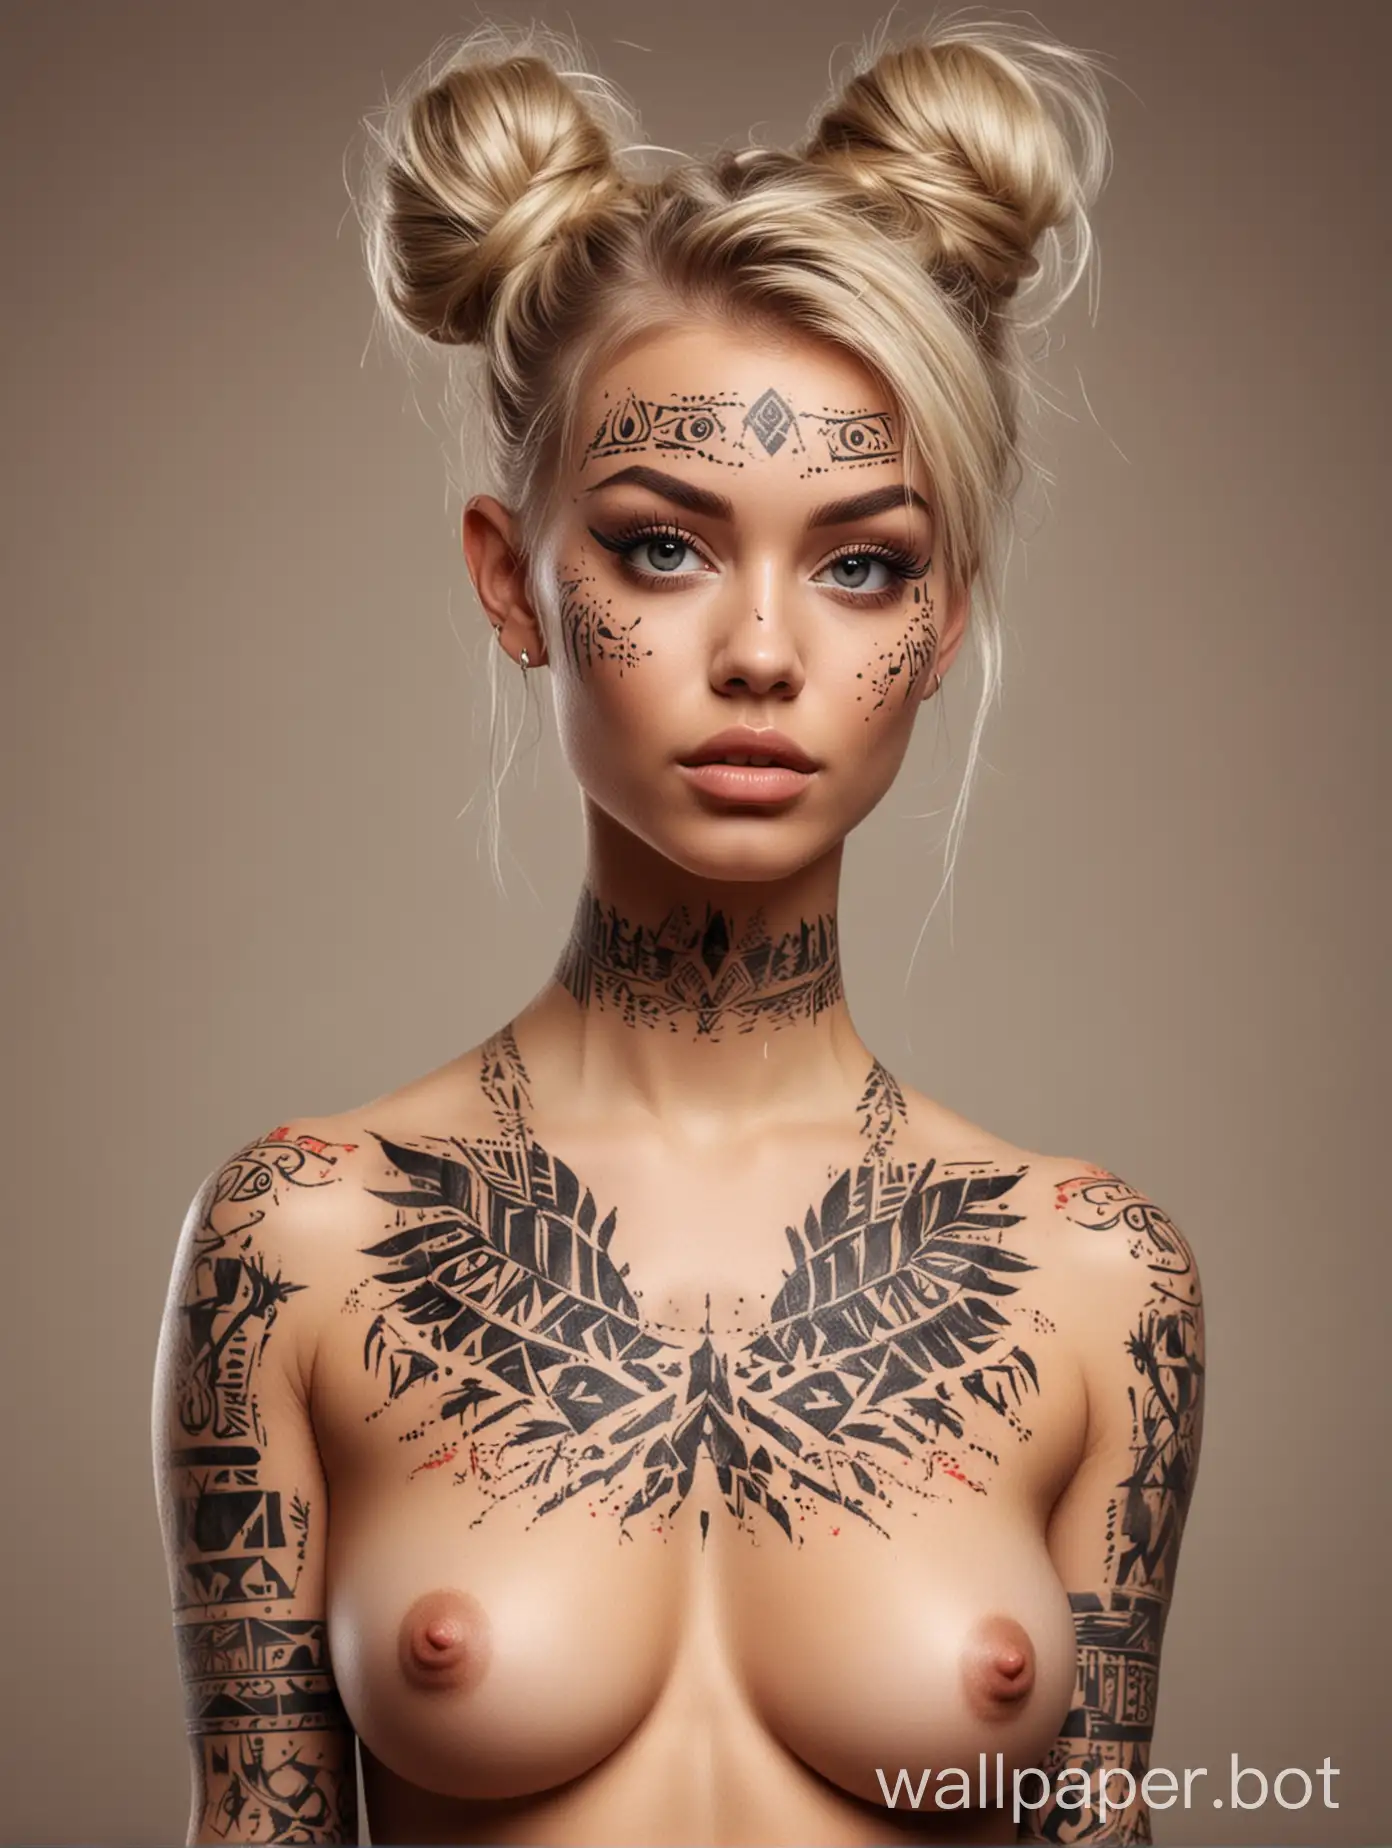 Captivating sketch of blonde woman naked her body covered with colored tribal tattoos, messy bun hairstyle thick eyelashes, shy pose